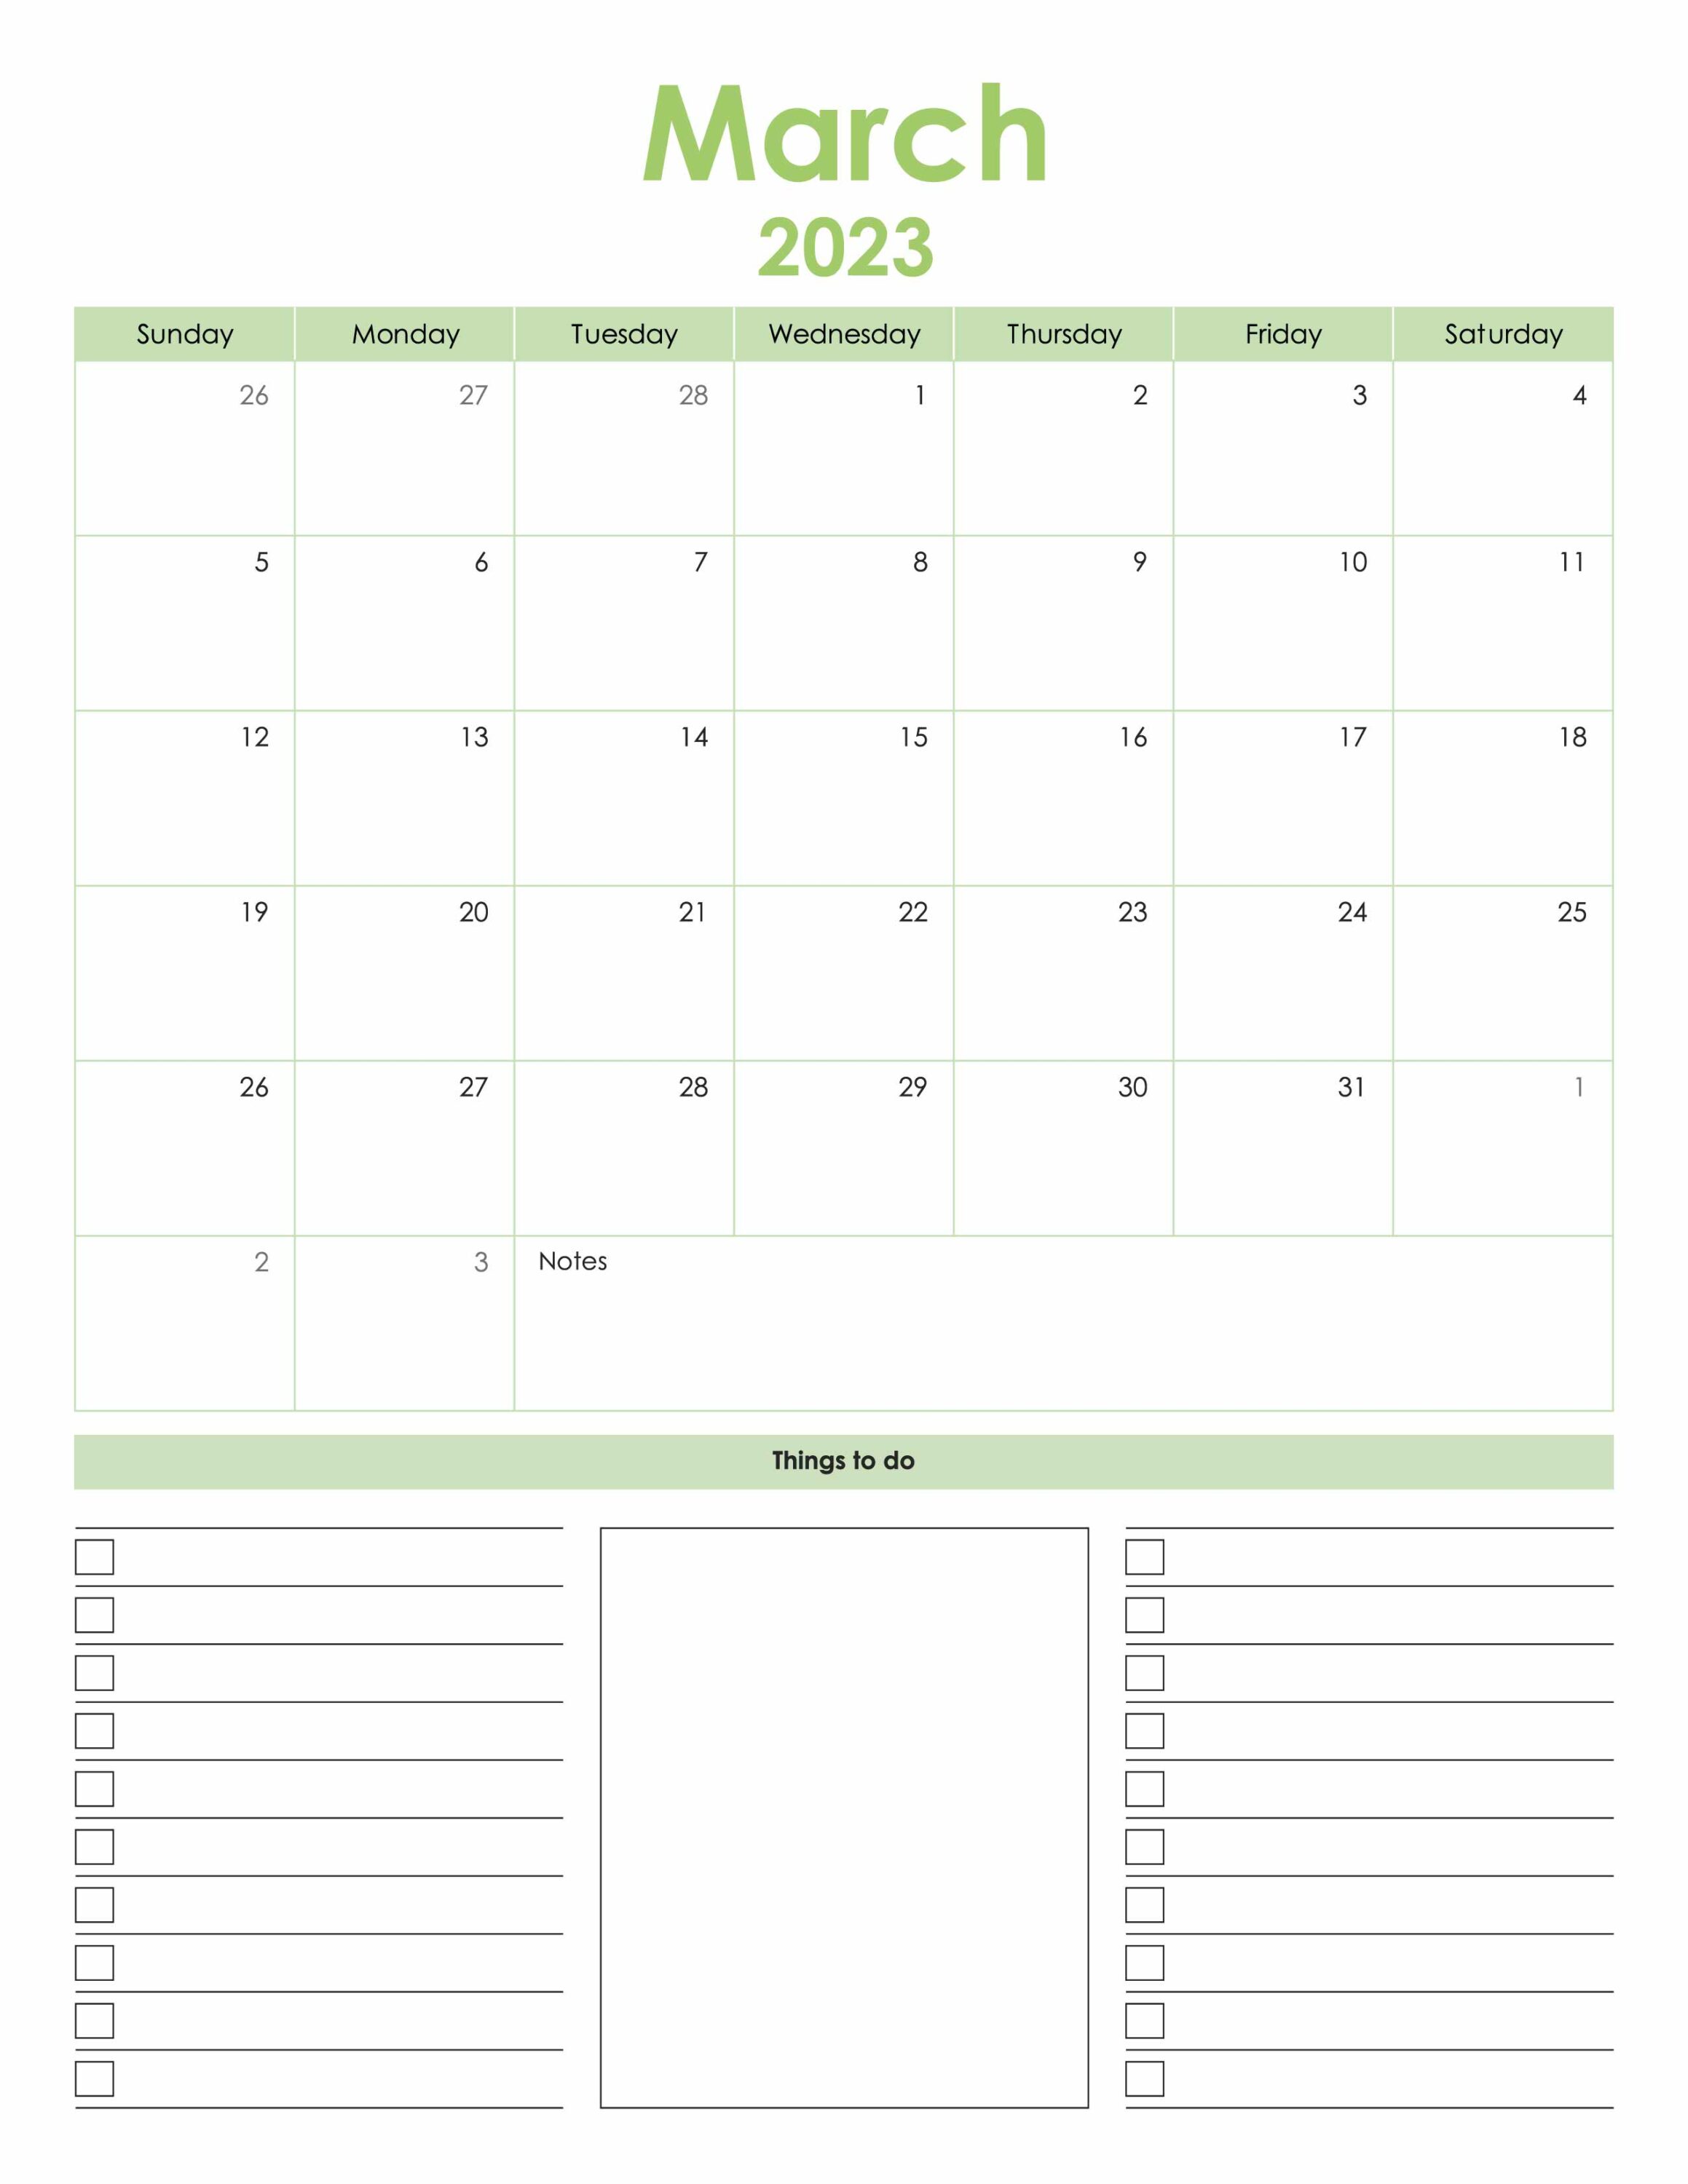 2023 Dated Planner Bundle, March page.